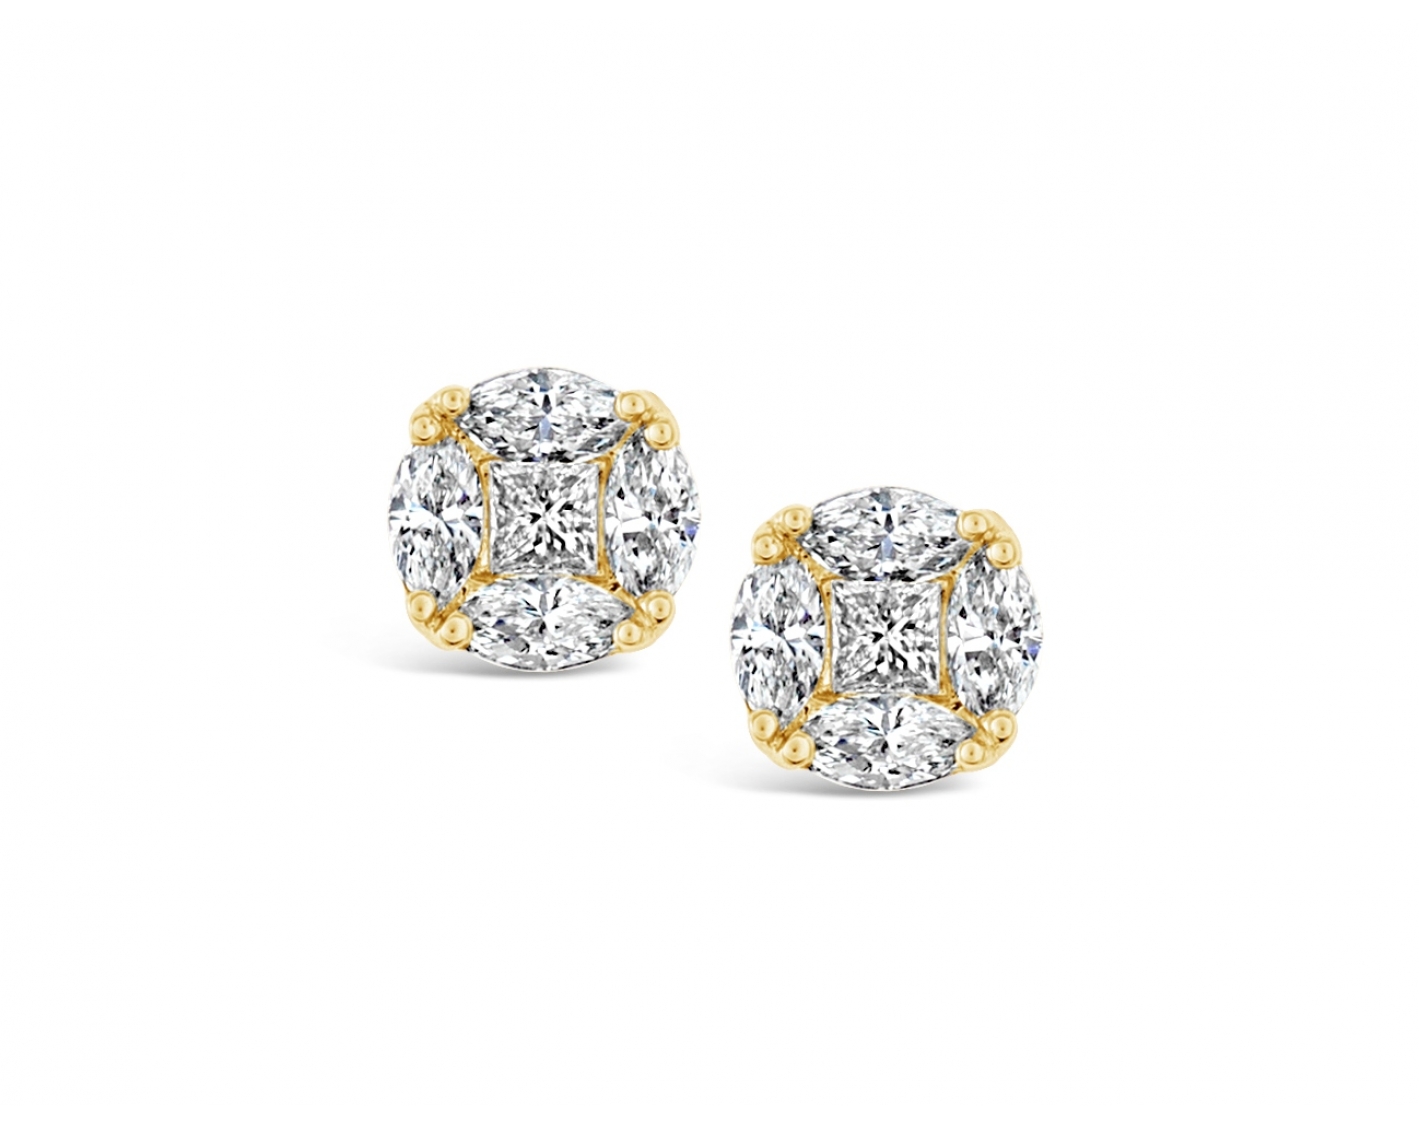 18k rose gold illusion set stud earrings with princess & marquises diamonds Photos & images